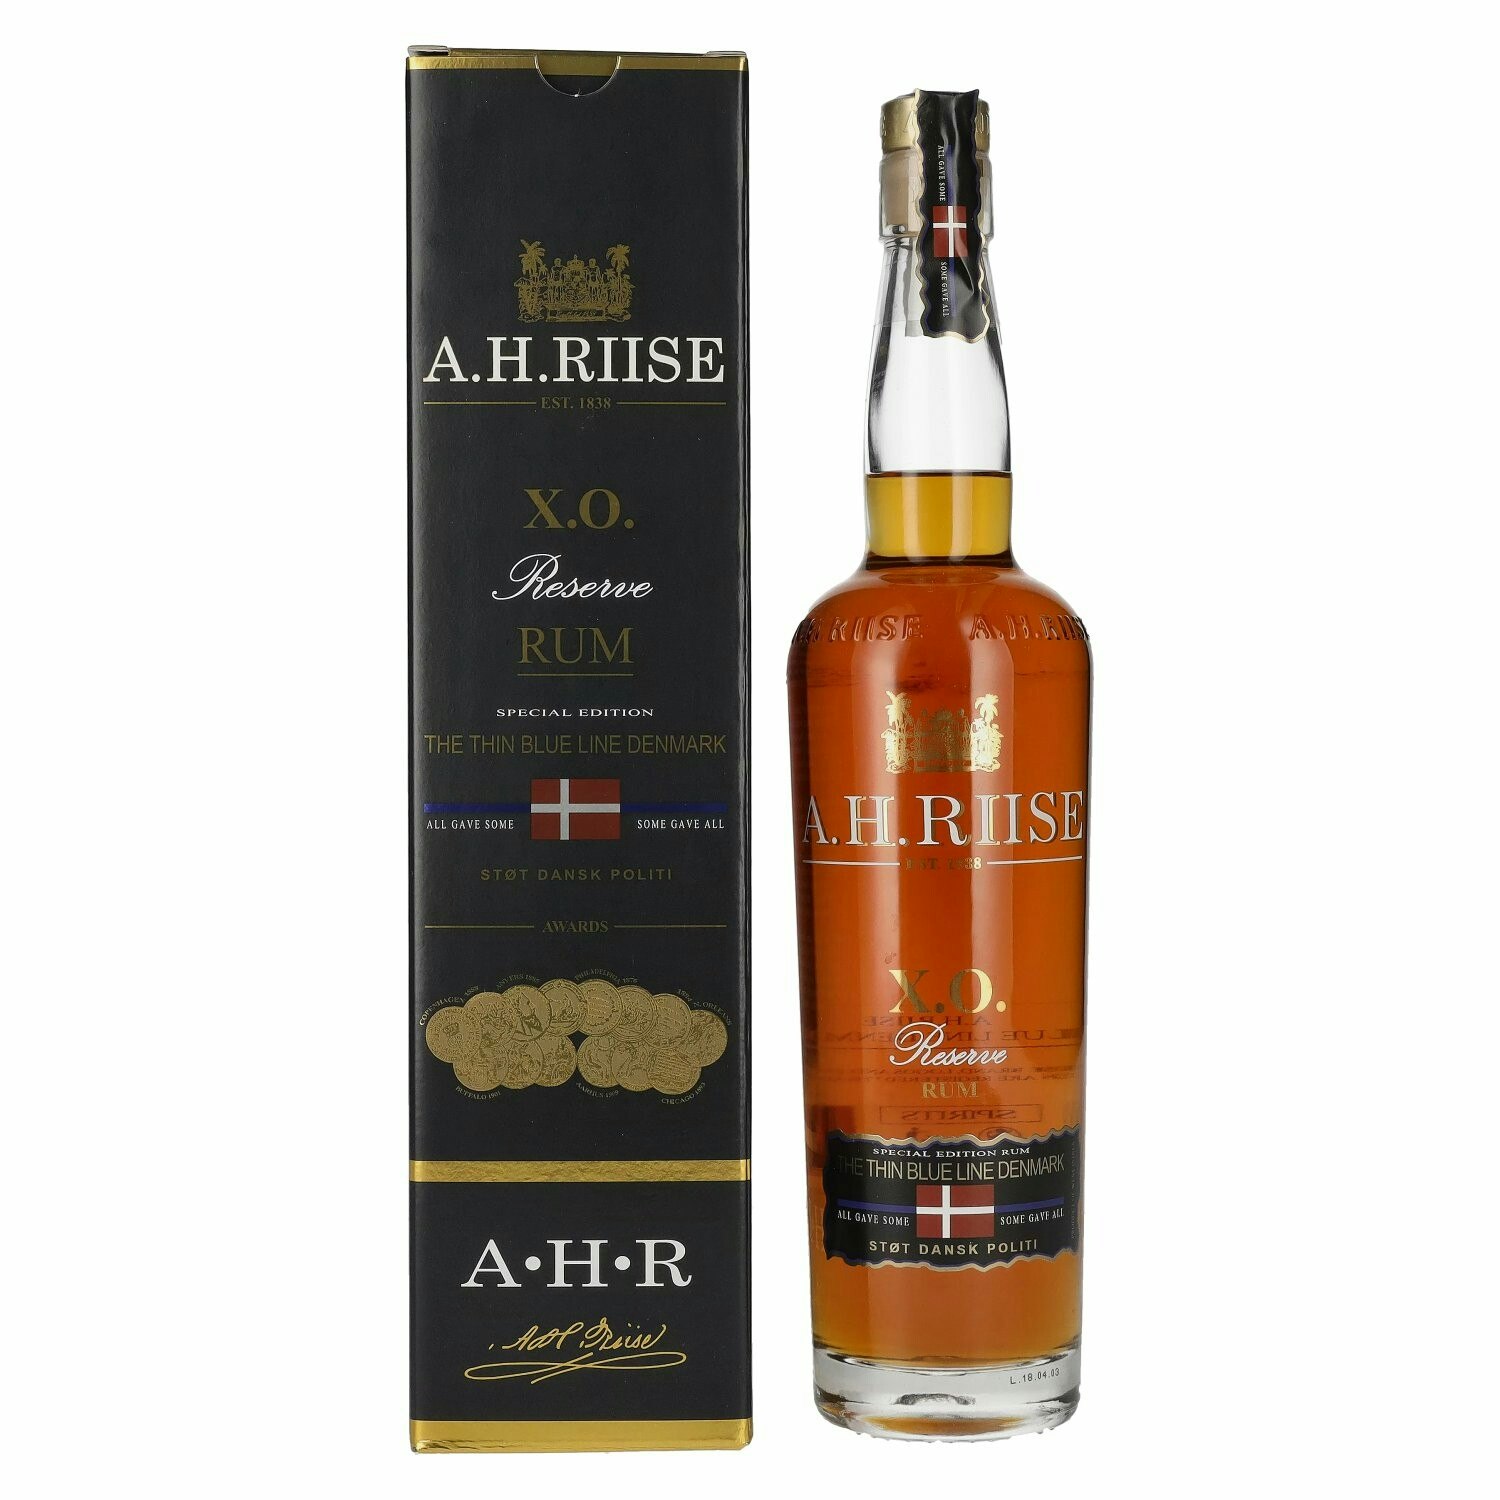 A.H. Riise X.O. Reserve Rum THE THIN BLUE LINE DENMARK 40% Vol. 0,7l in Giftbox